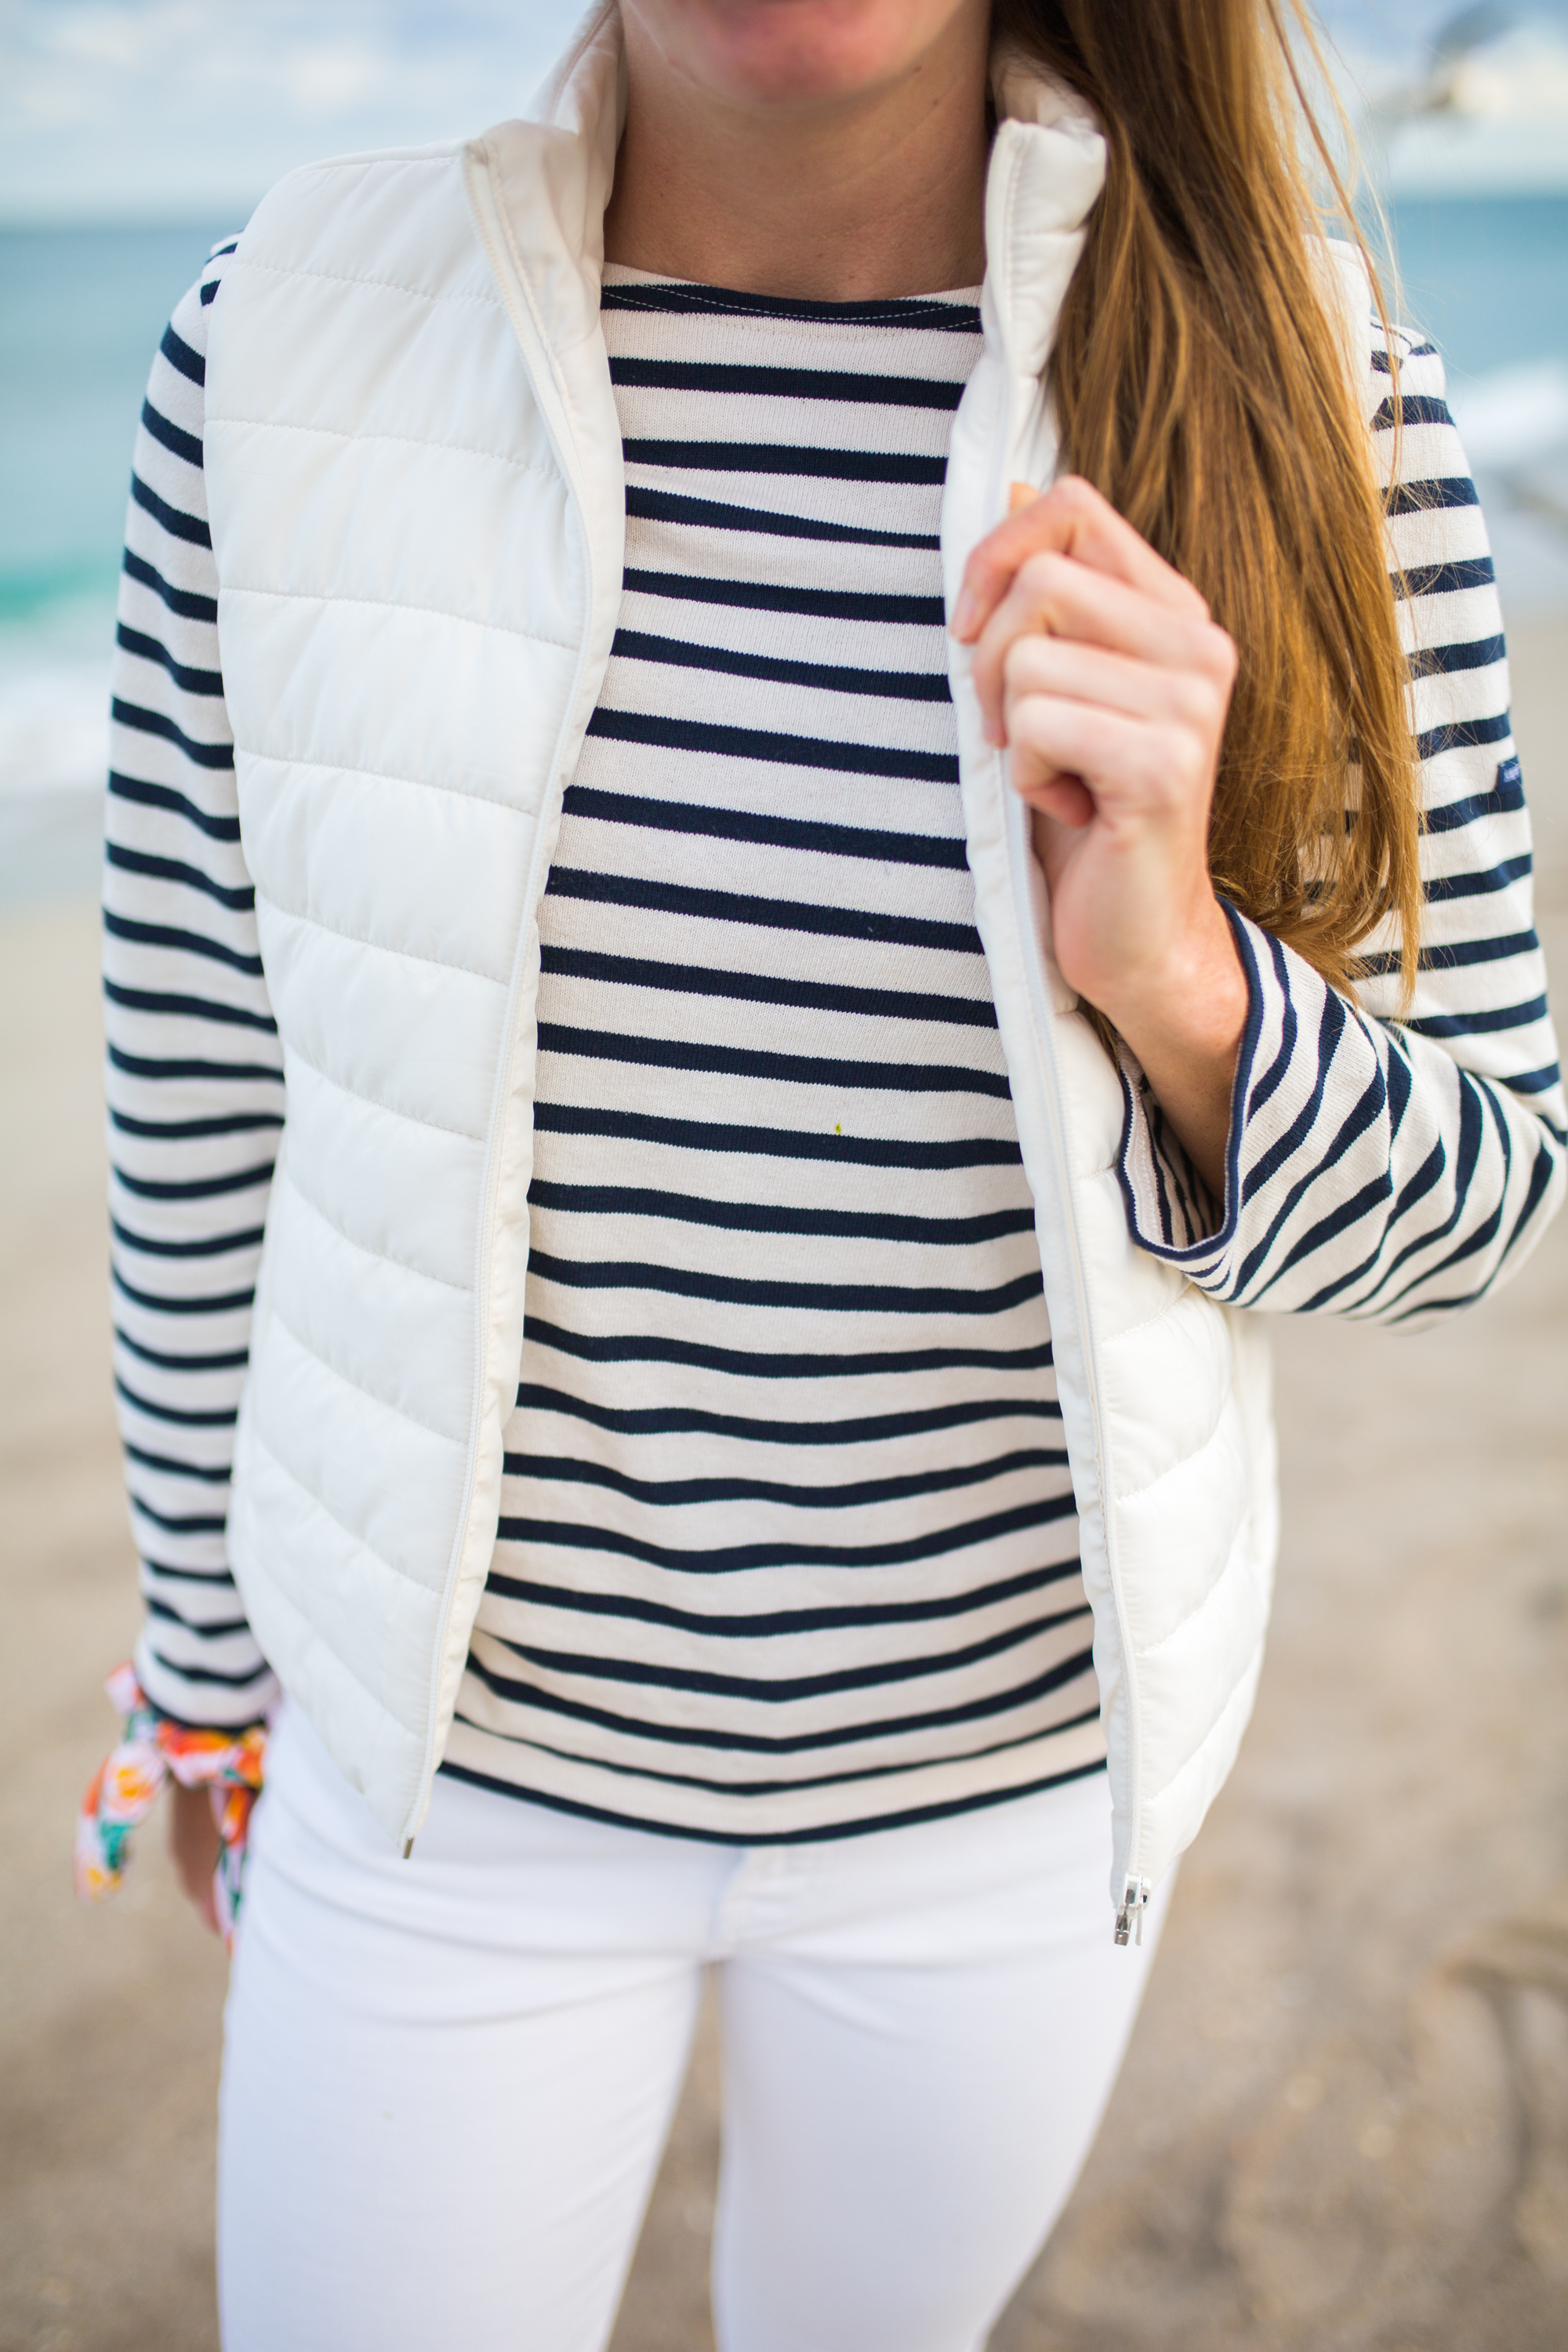 Saint James Breton Striped Shirt / American Style / Classic Style / Casual Outfit / How to Wear a Striped Top / White Jeans / Beach Style / Beach Outfit - Sunshine Style, A Florida Based Fashion Blog by Katie 